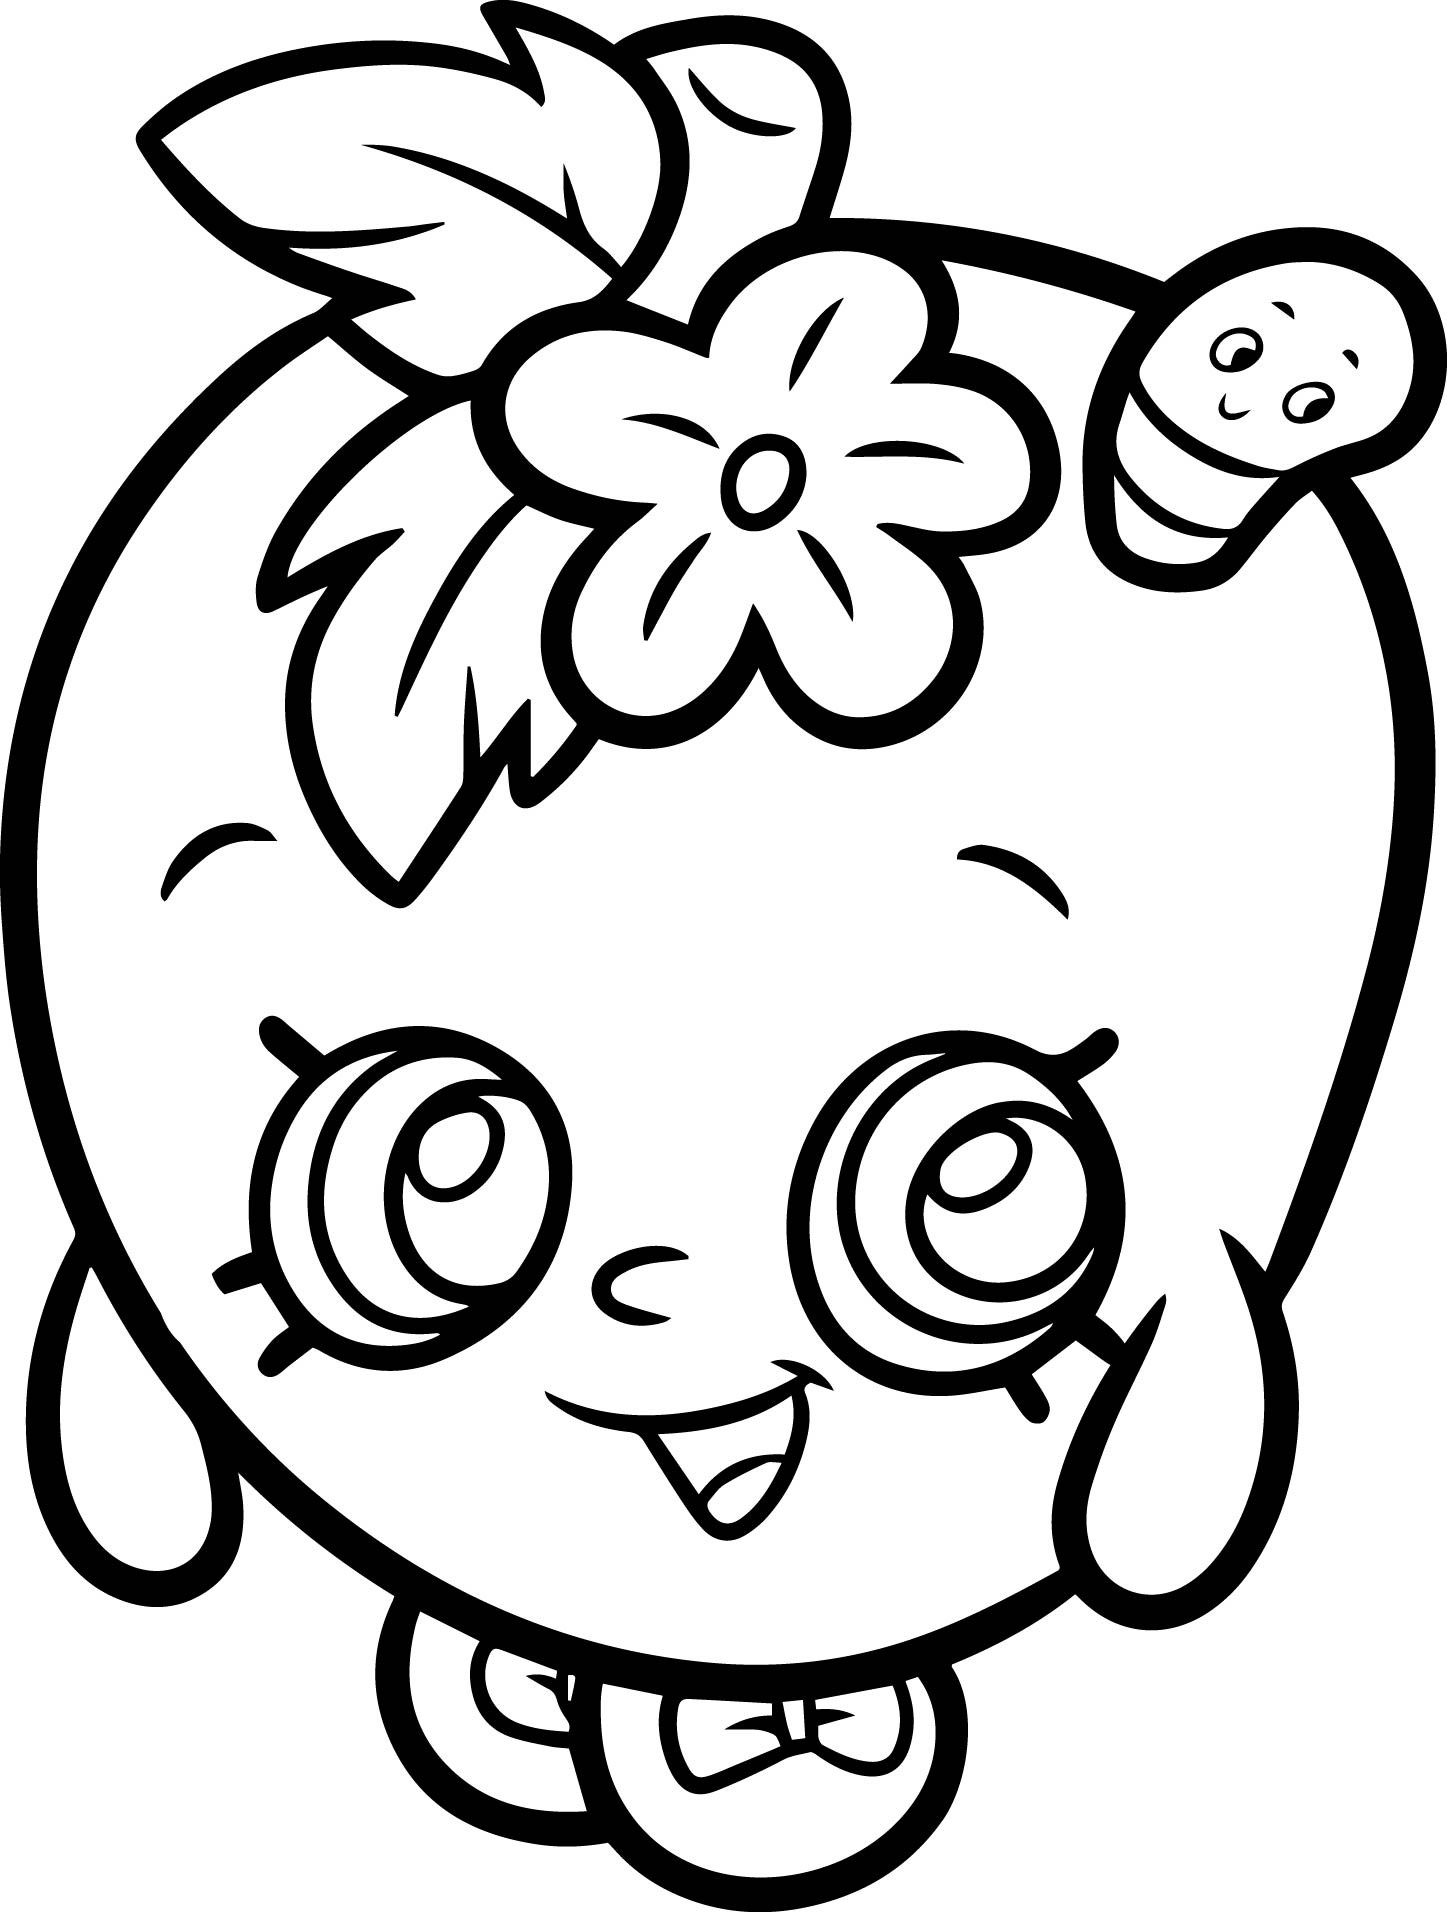 Coloring Pages For Girls Shopkins Apple
 Apple Blossom From Shopkins Coloring Page